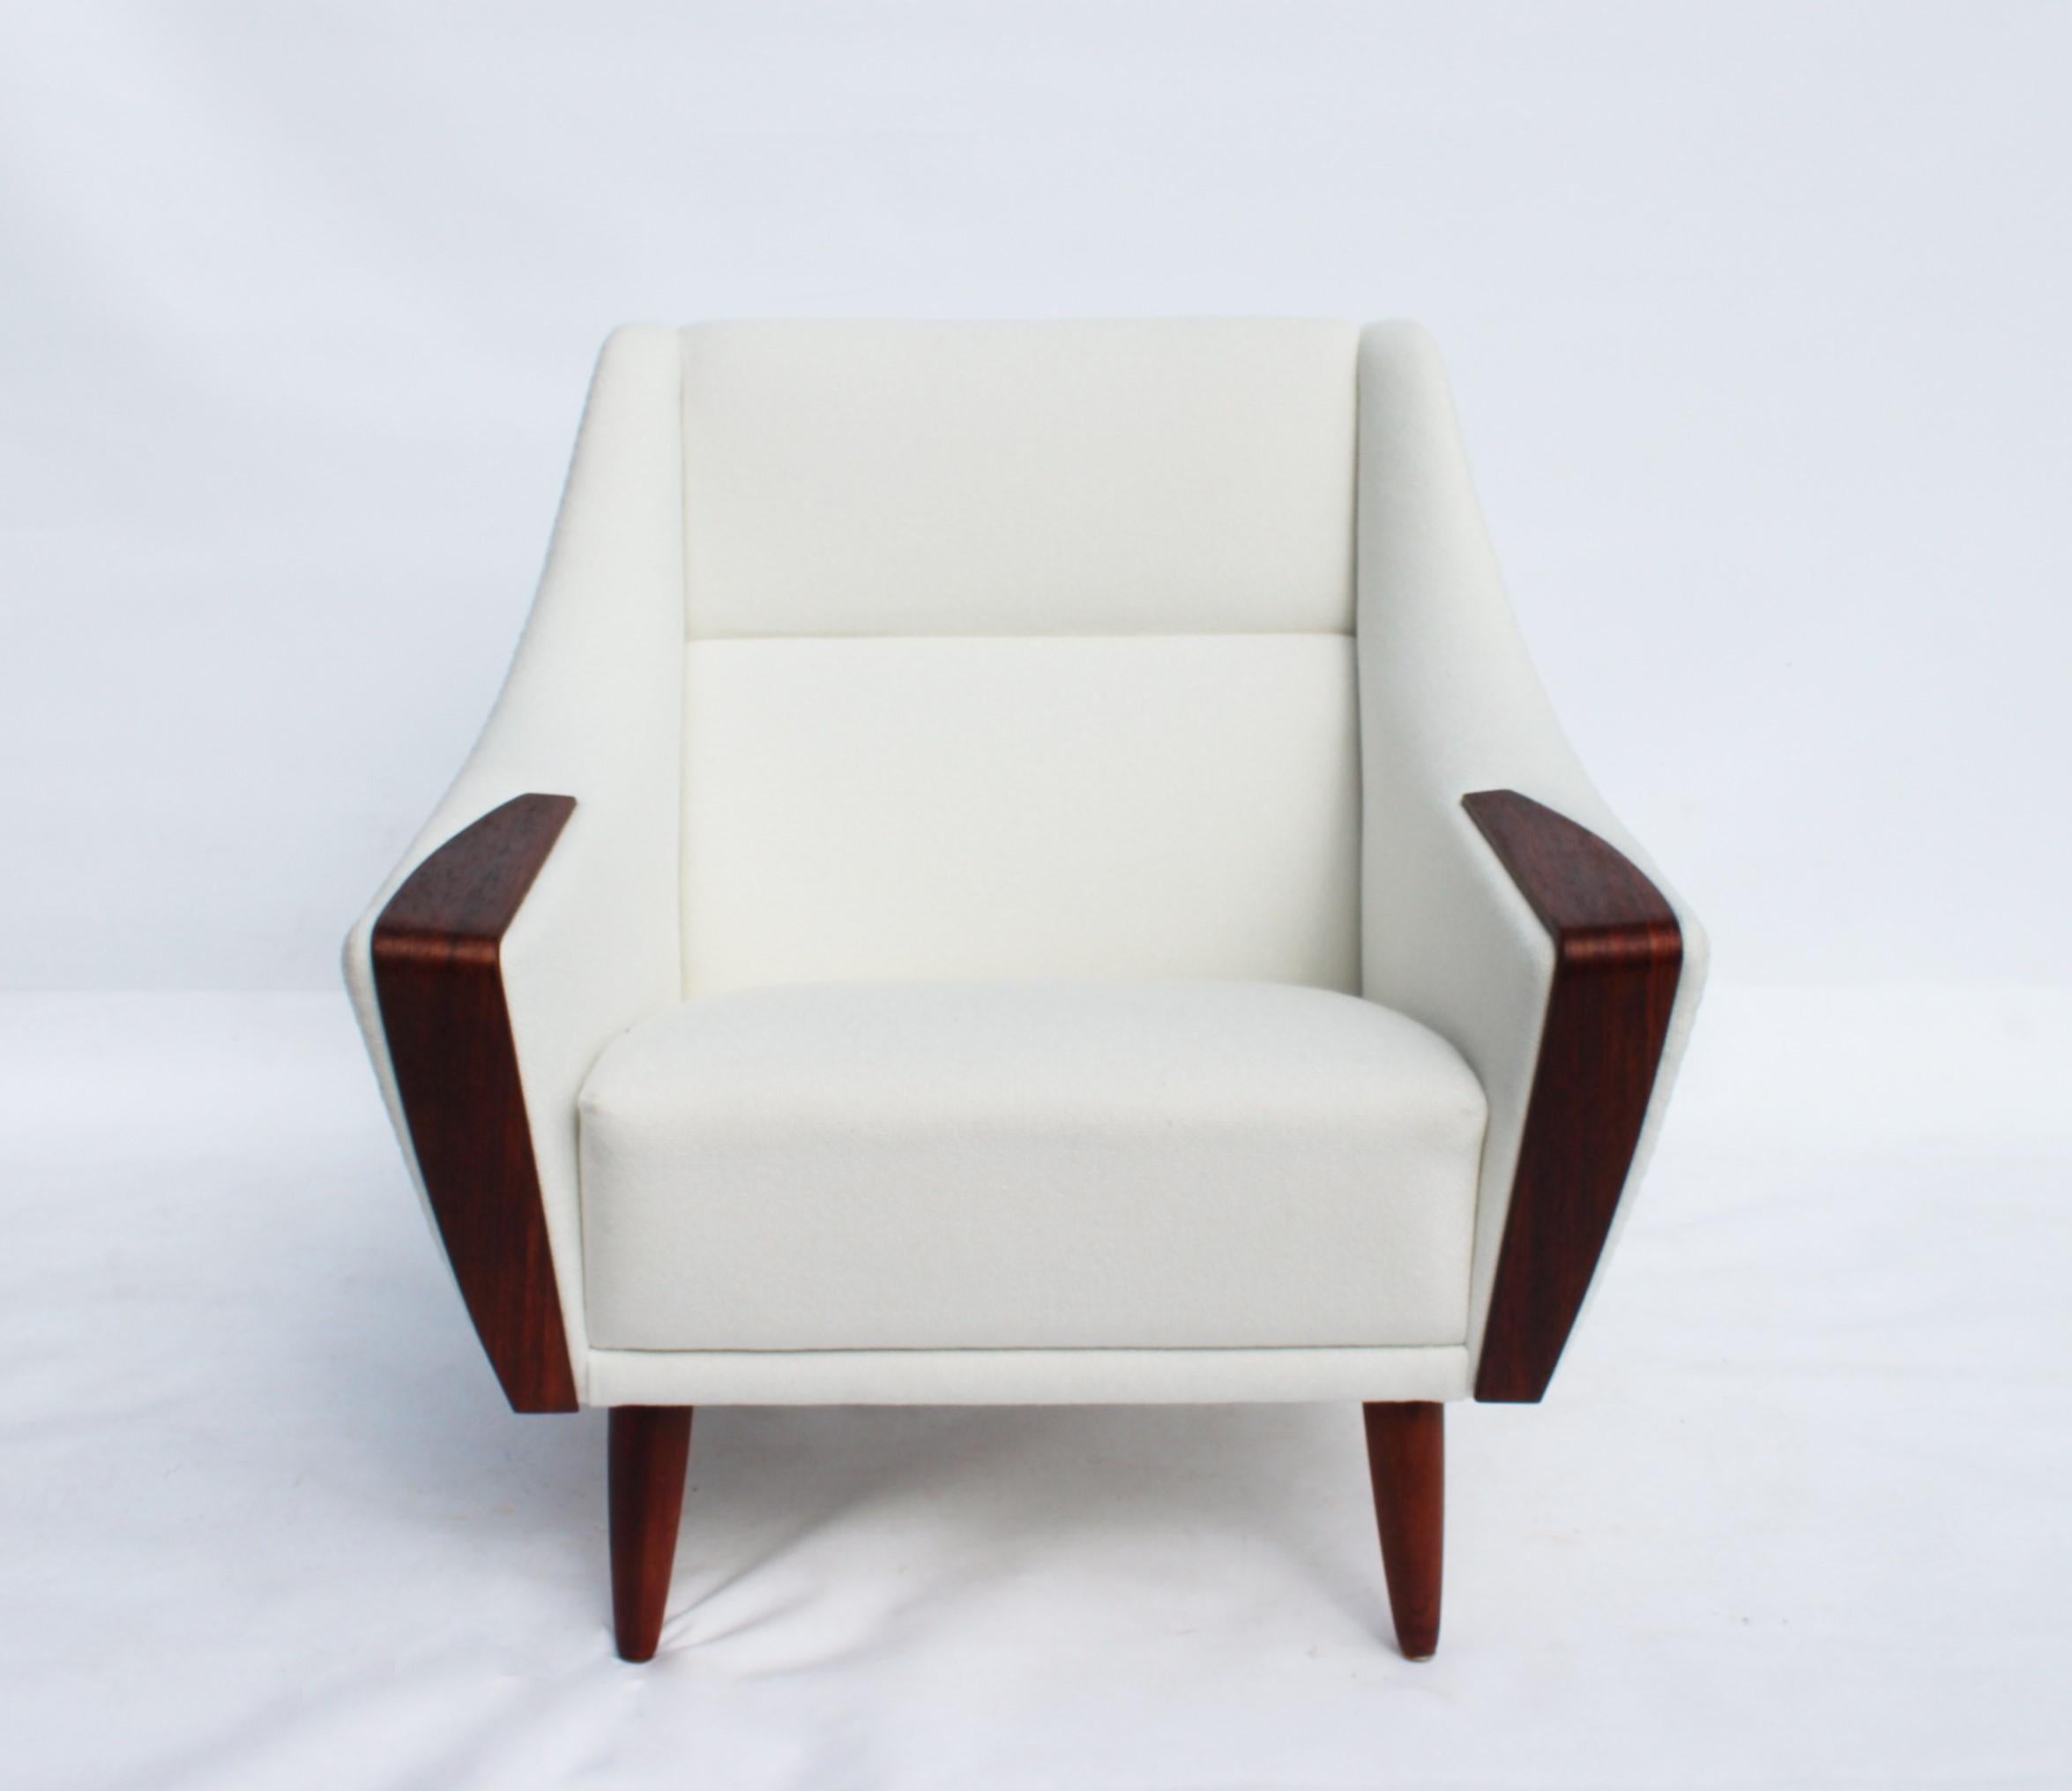 The armchair with a low back, upholstered in an elegant white fabric and resting on beautifully polished rosewood legs, is a masterpiece of Danish design from the 1960s. Its clean lines and organic form reflect the period aesthetics of Scandinavian